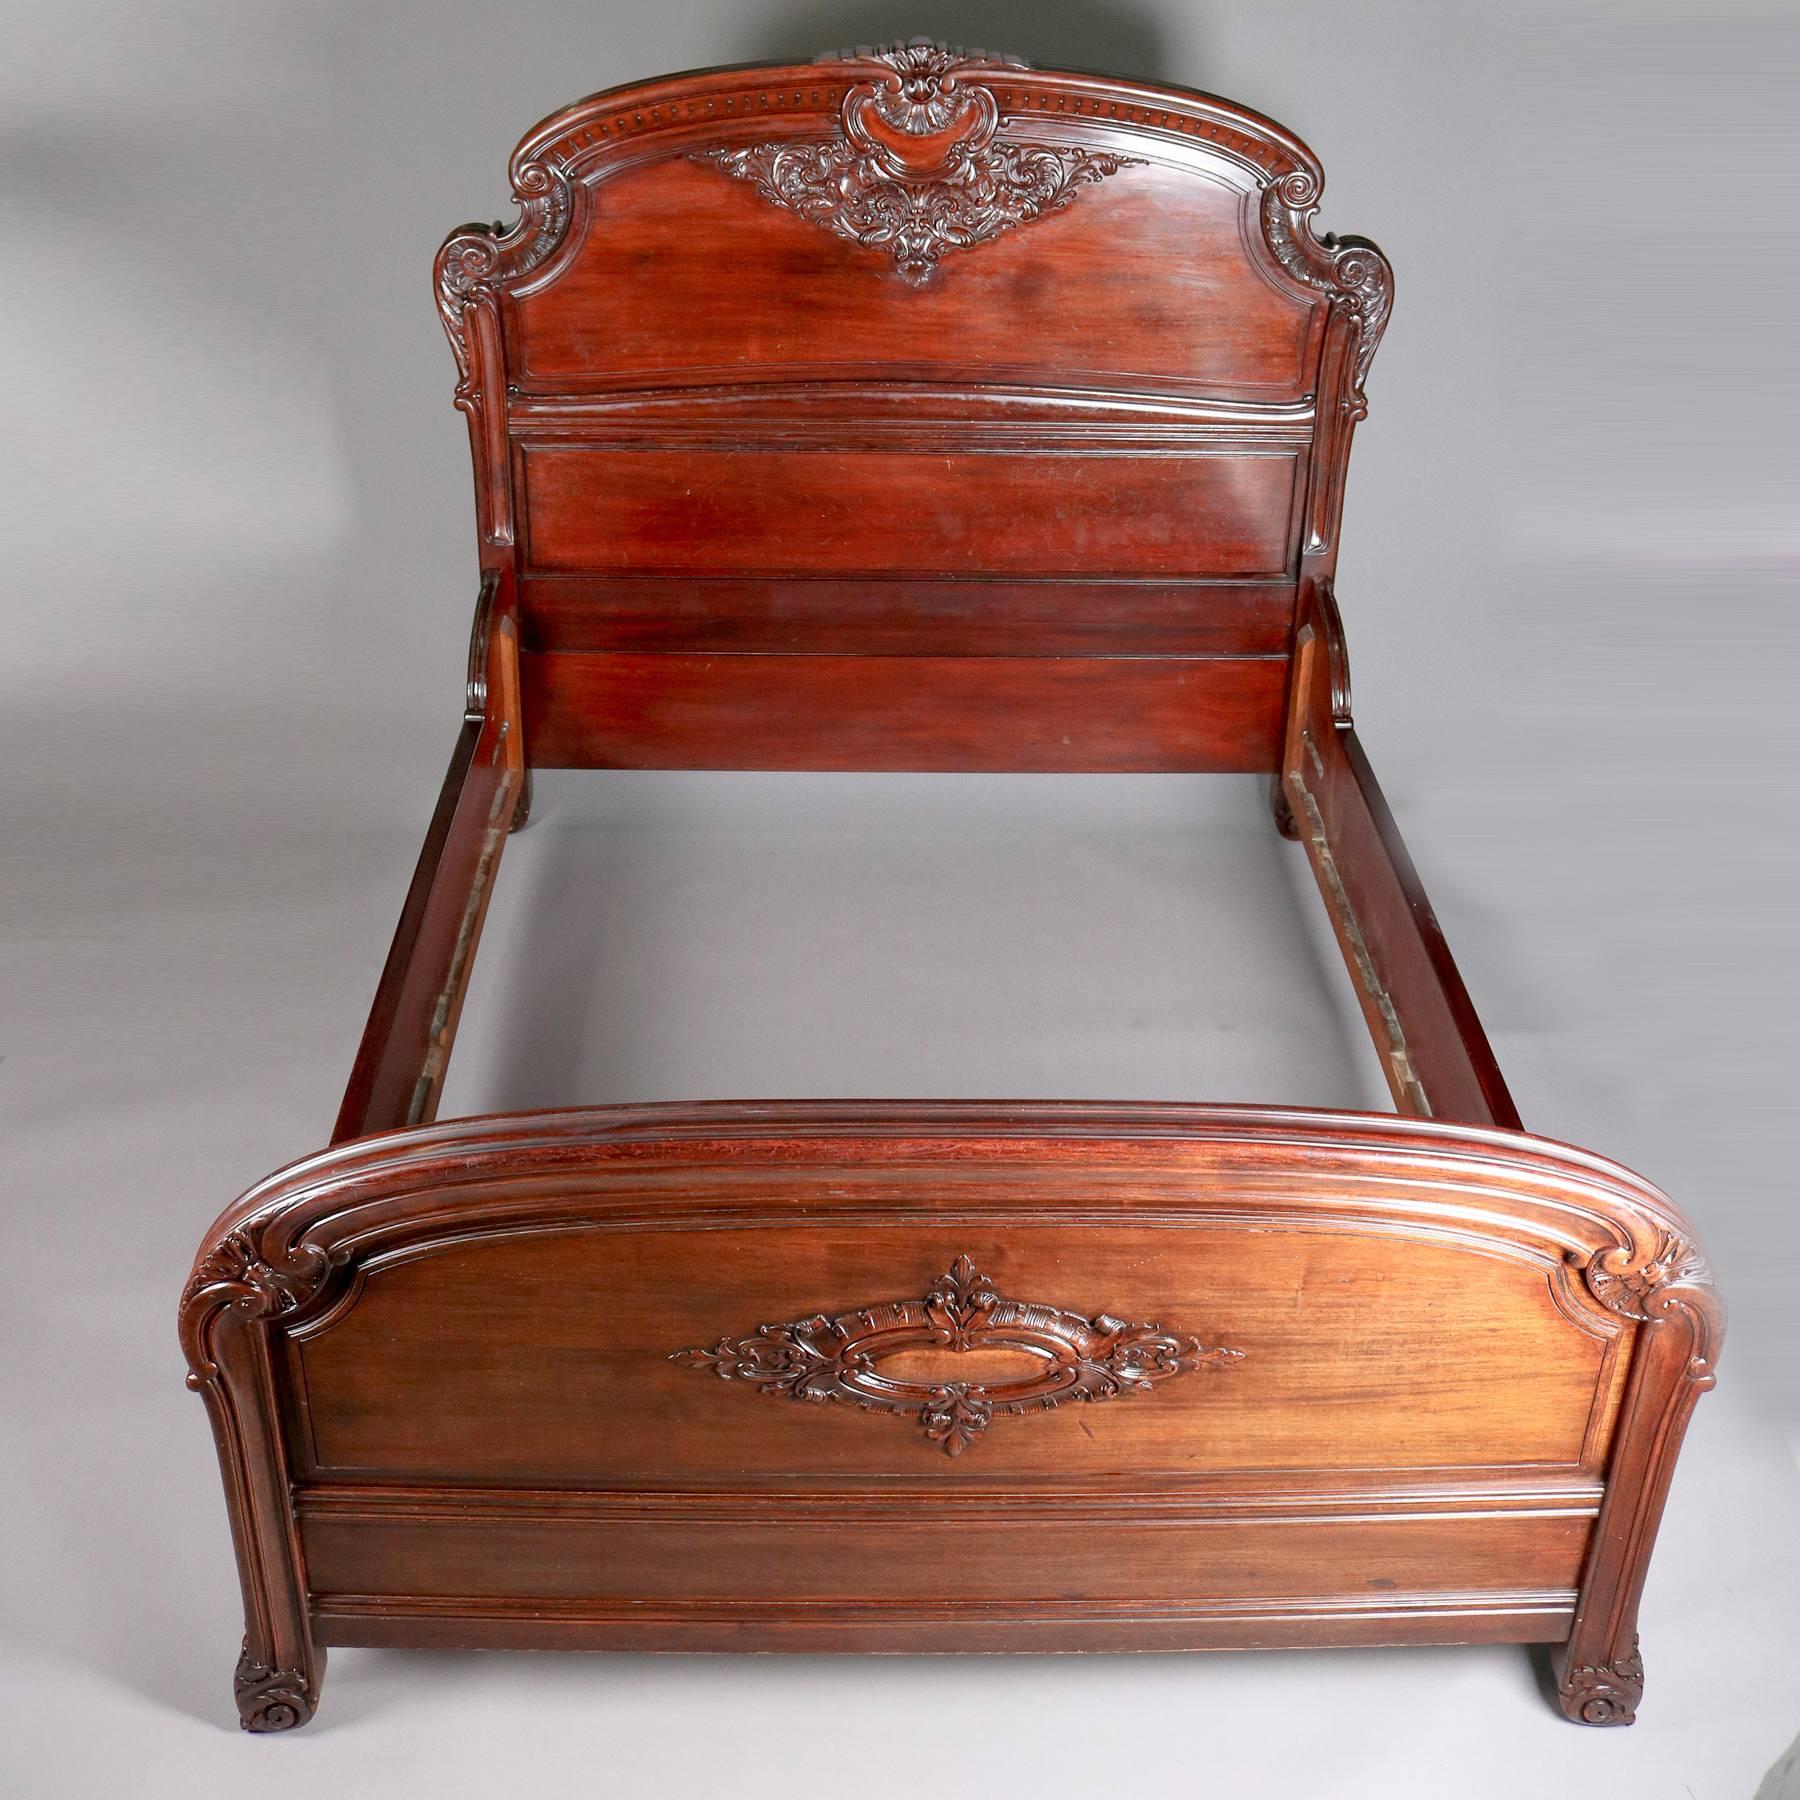 Carved mahogany queen-size bed by Horner Bros, features scroll and foliate decoration including ornately carved crest and acanthus carved feet, with three cross slats, 20th century

Measures: 61